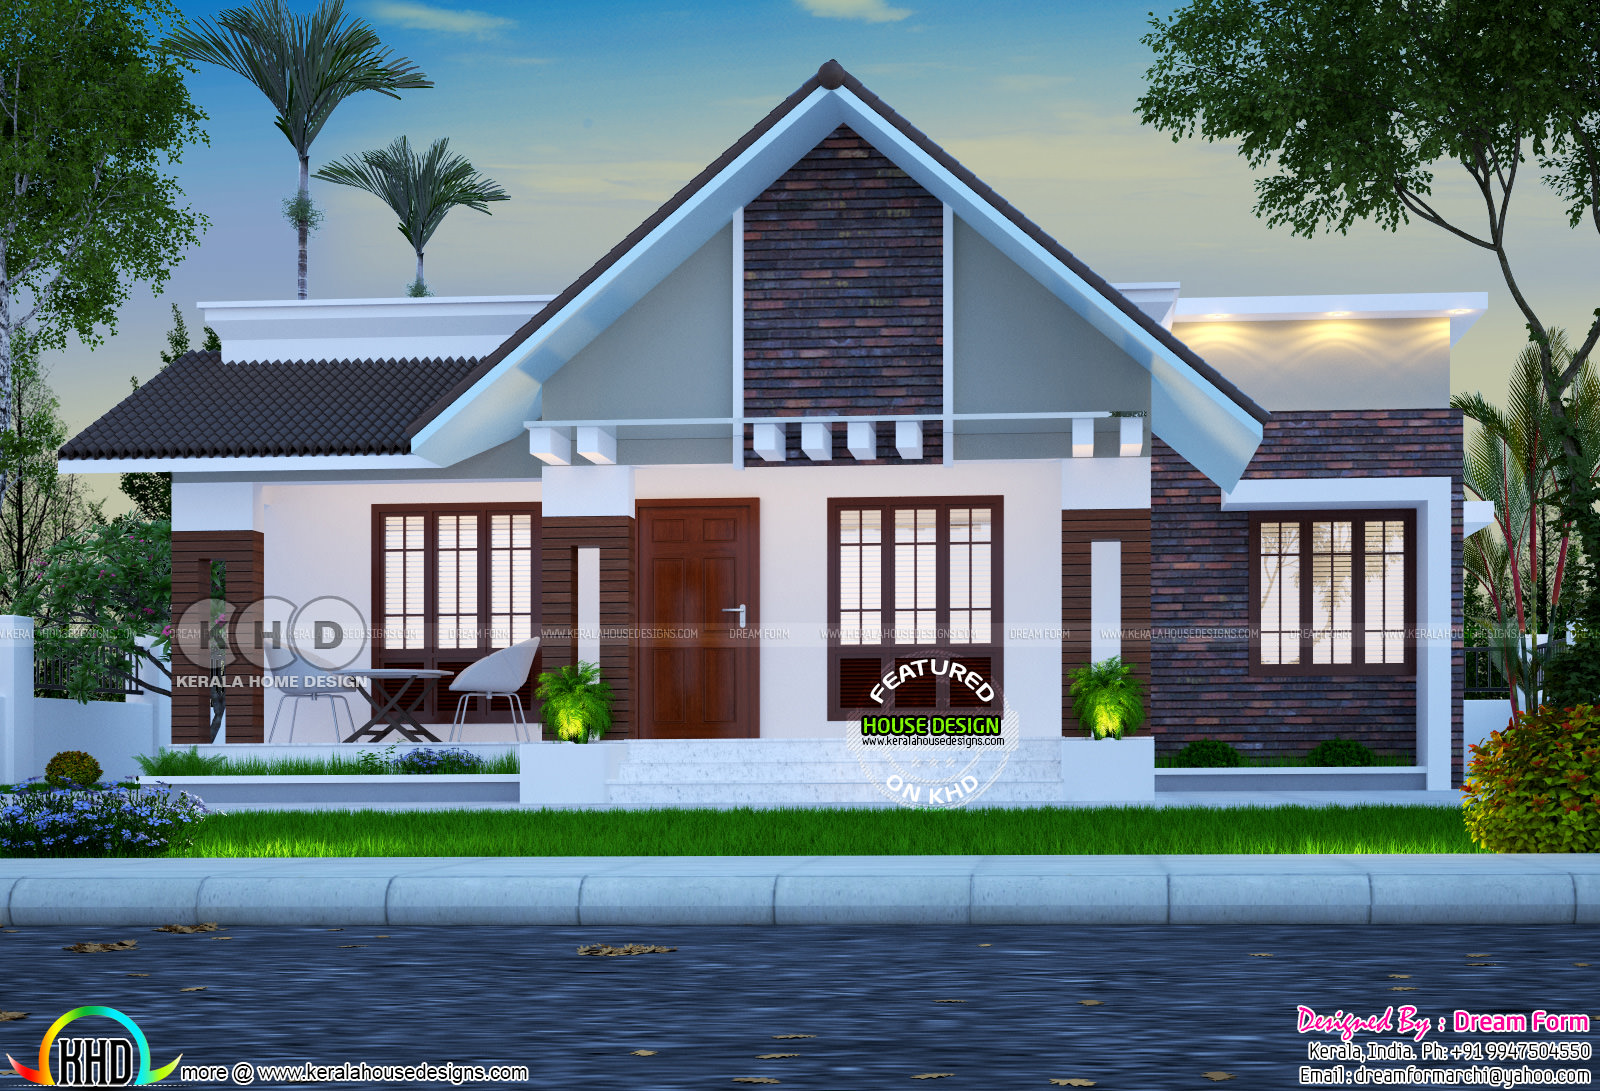 Superb low  cost  house  plan  Kerala home  design  and floor 